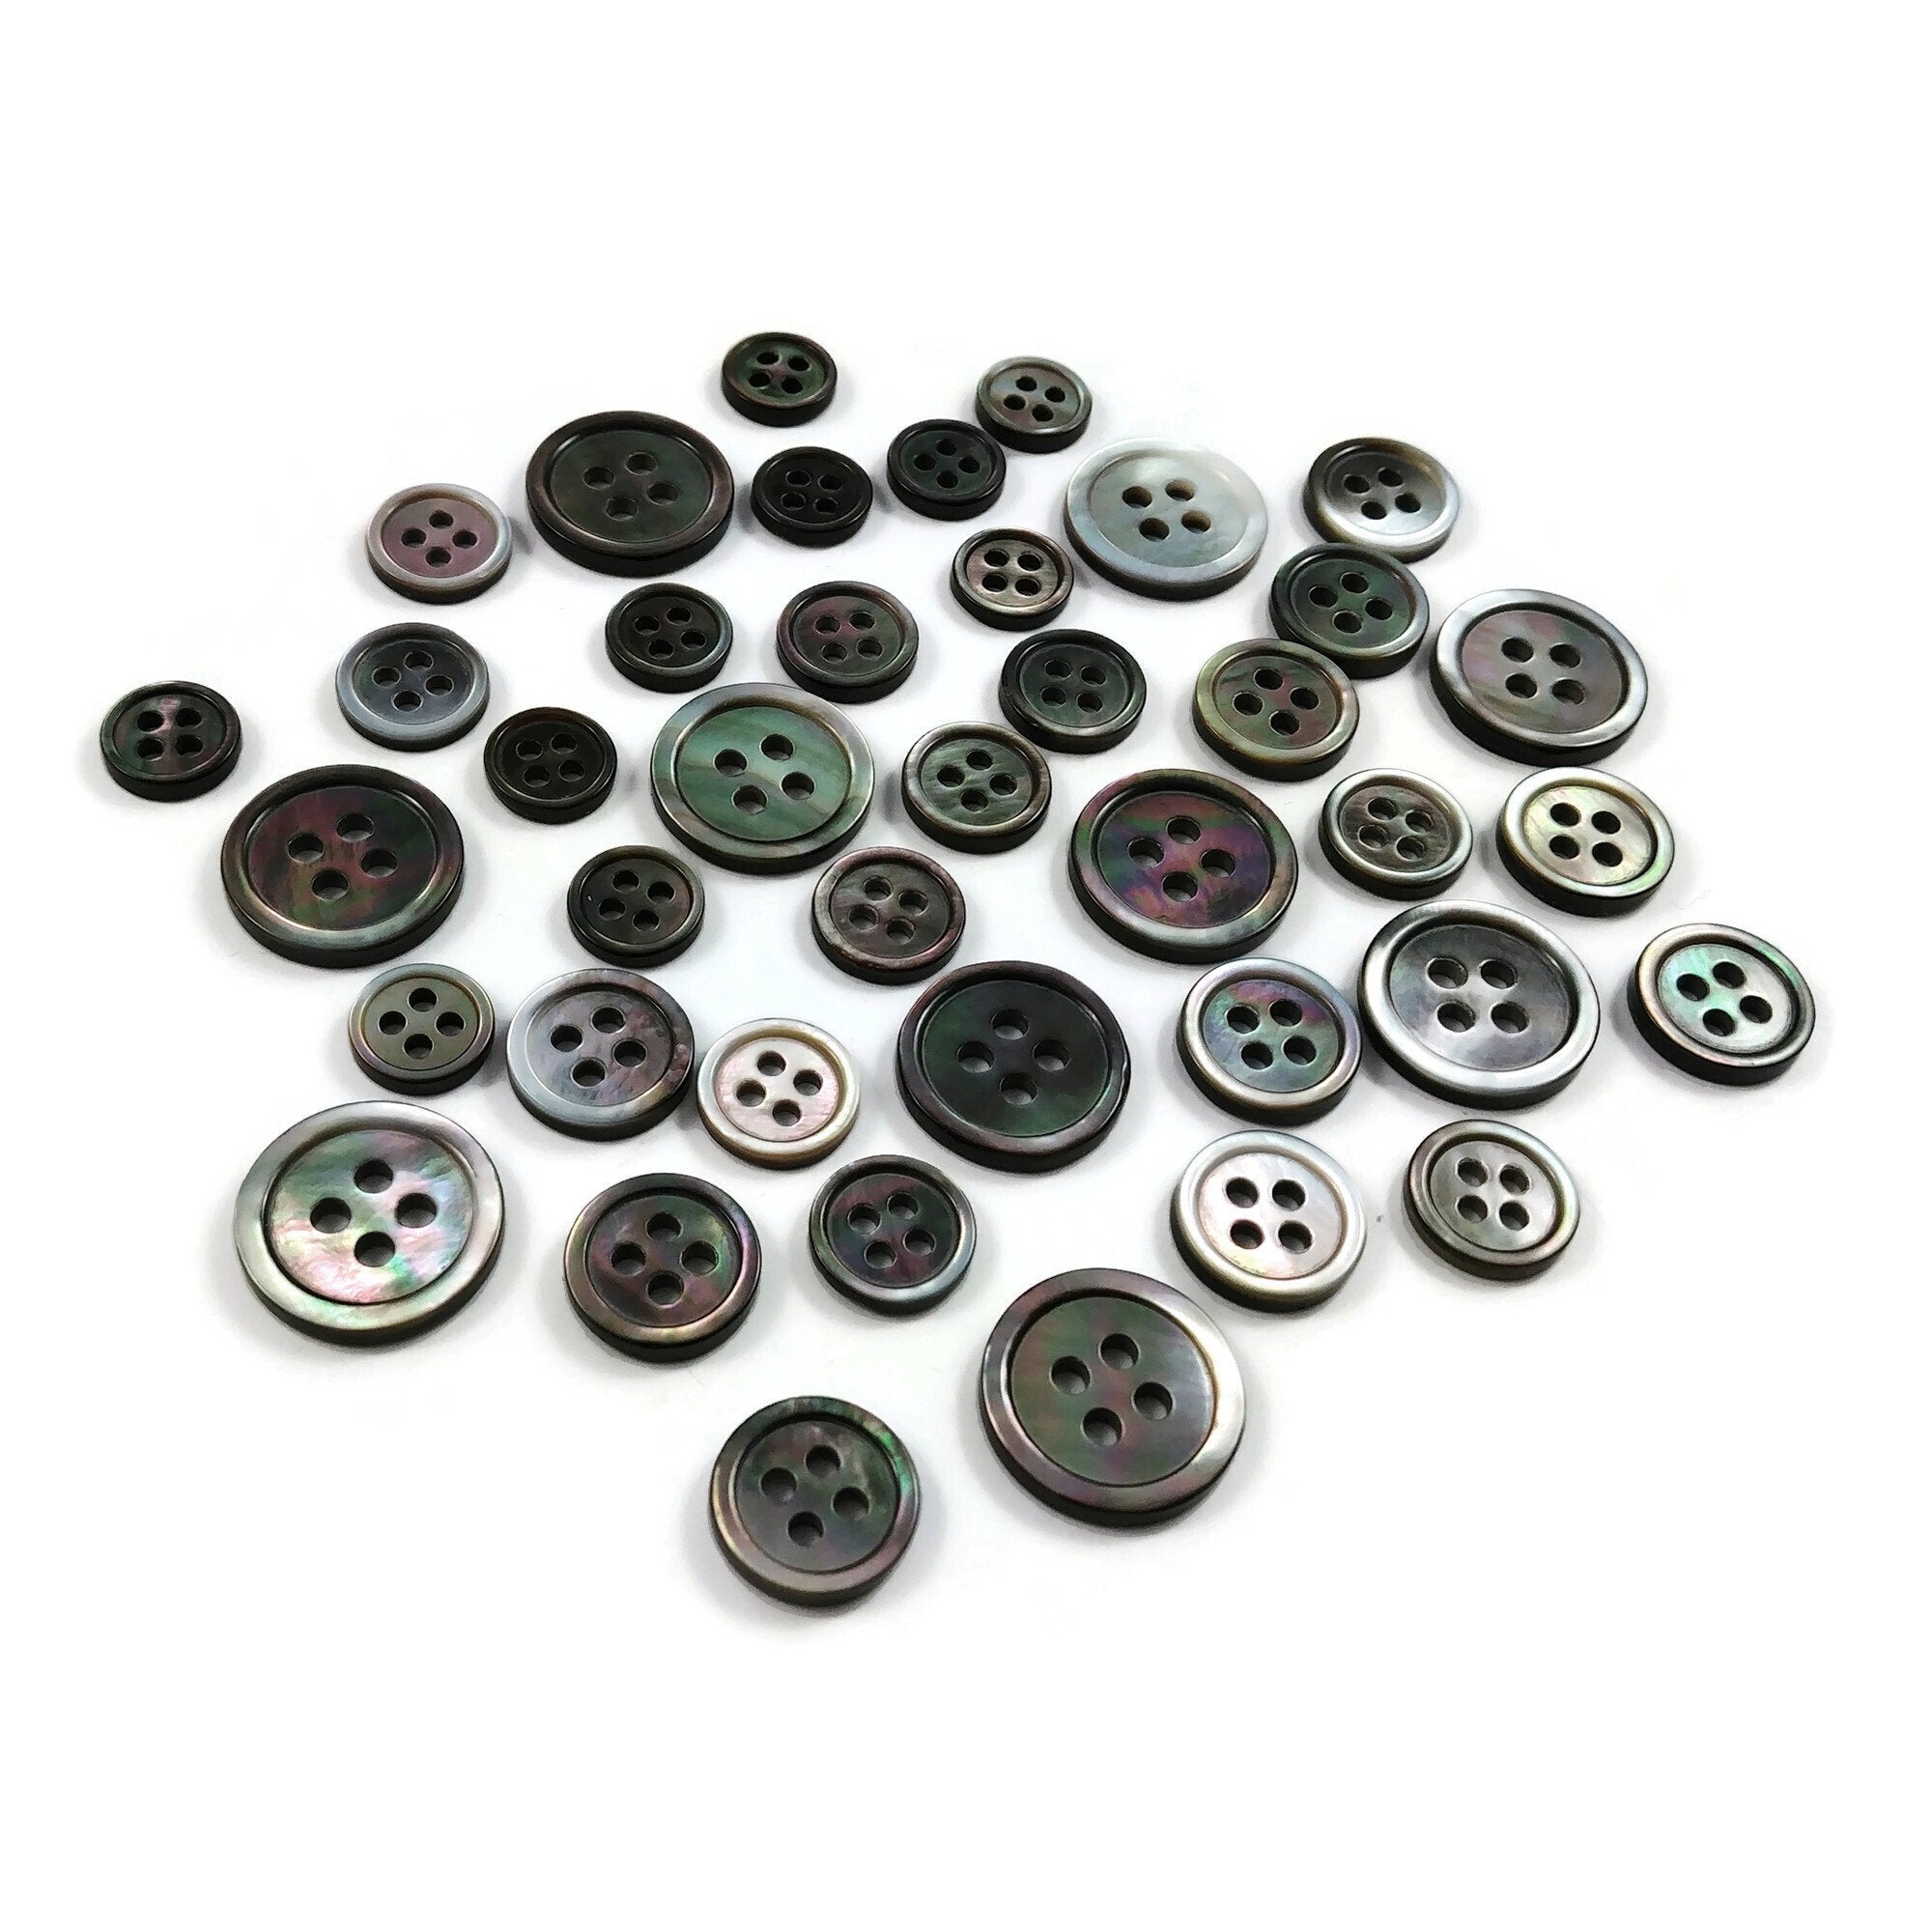 Grey mother of pearl buttons, Natural black lip shell sewing buttons, 4 sizes available